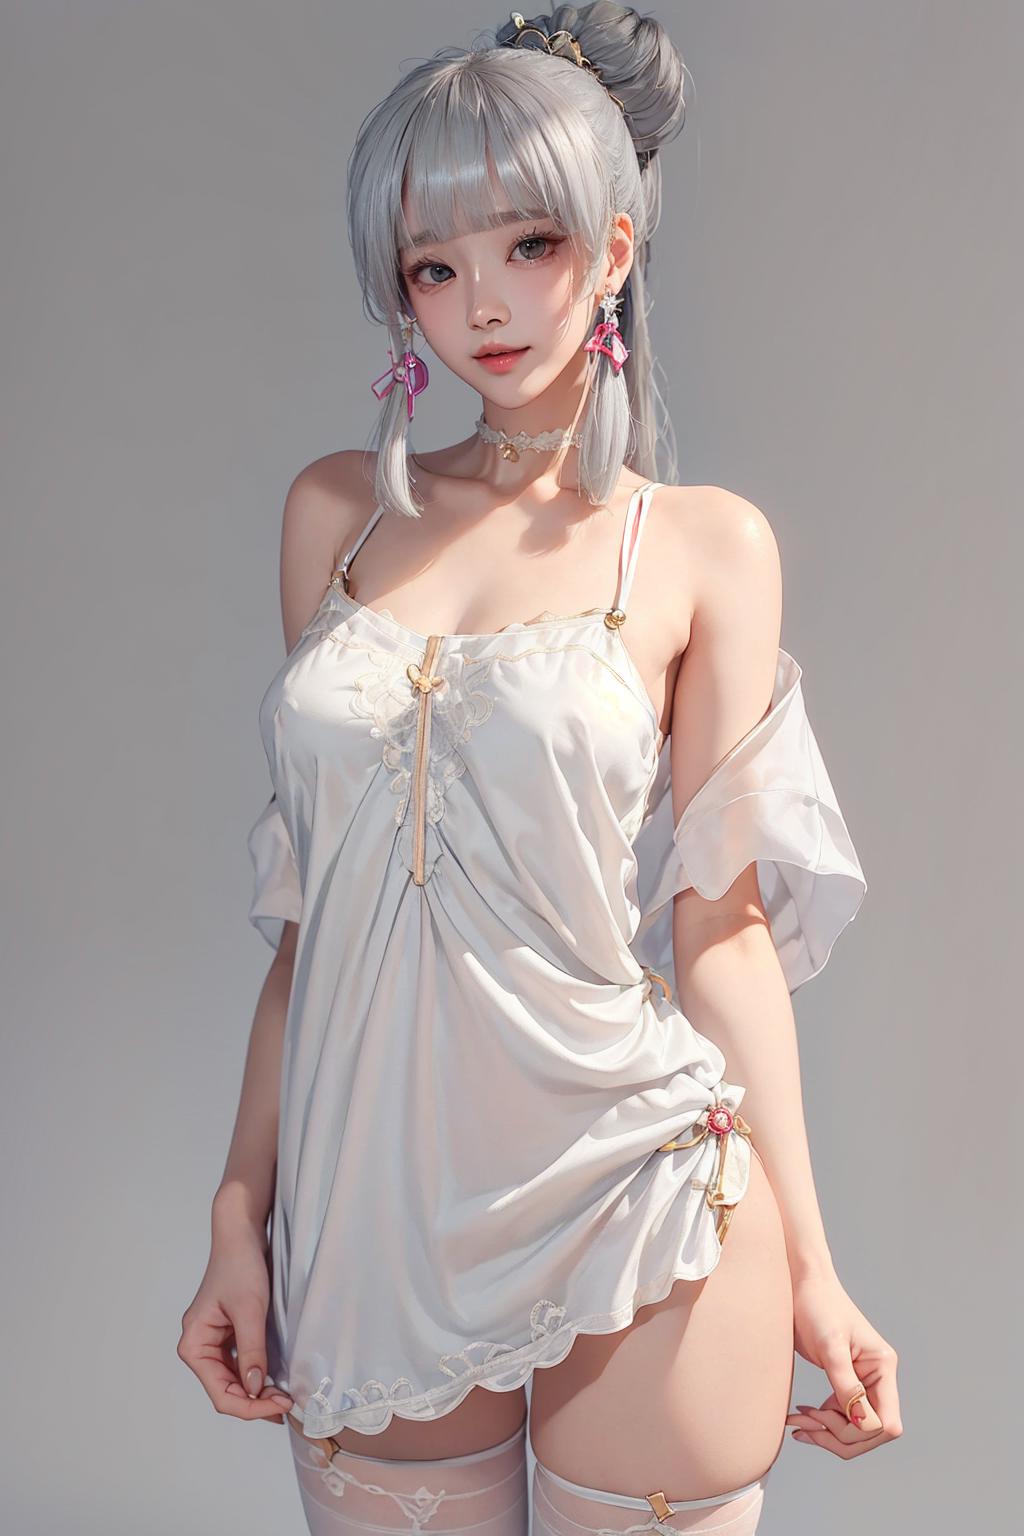 A 3D rendered image of a woman wearing a white dress with pink accents.